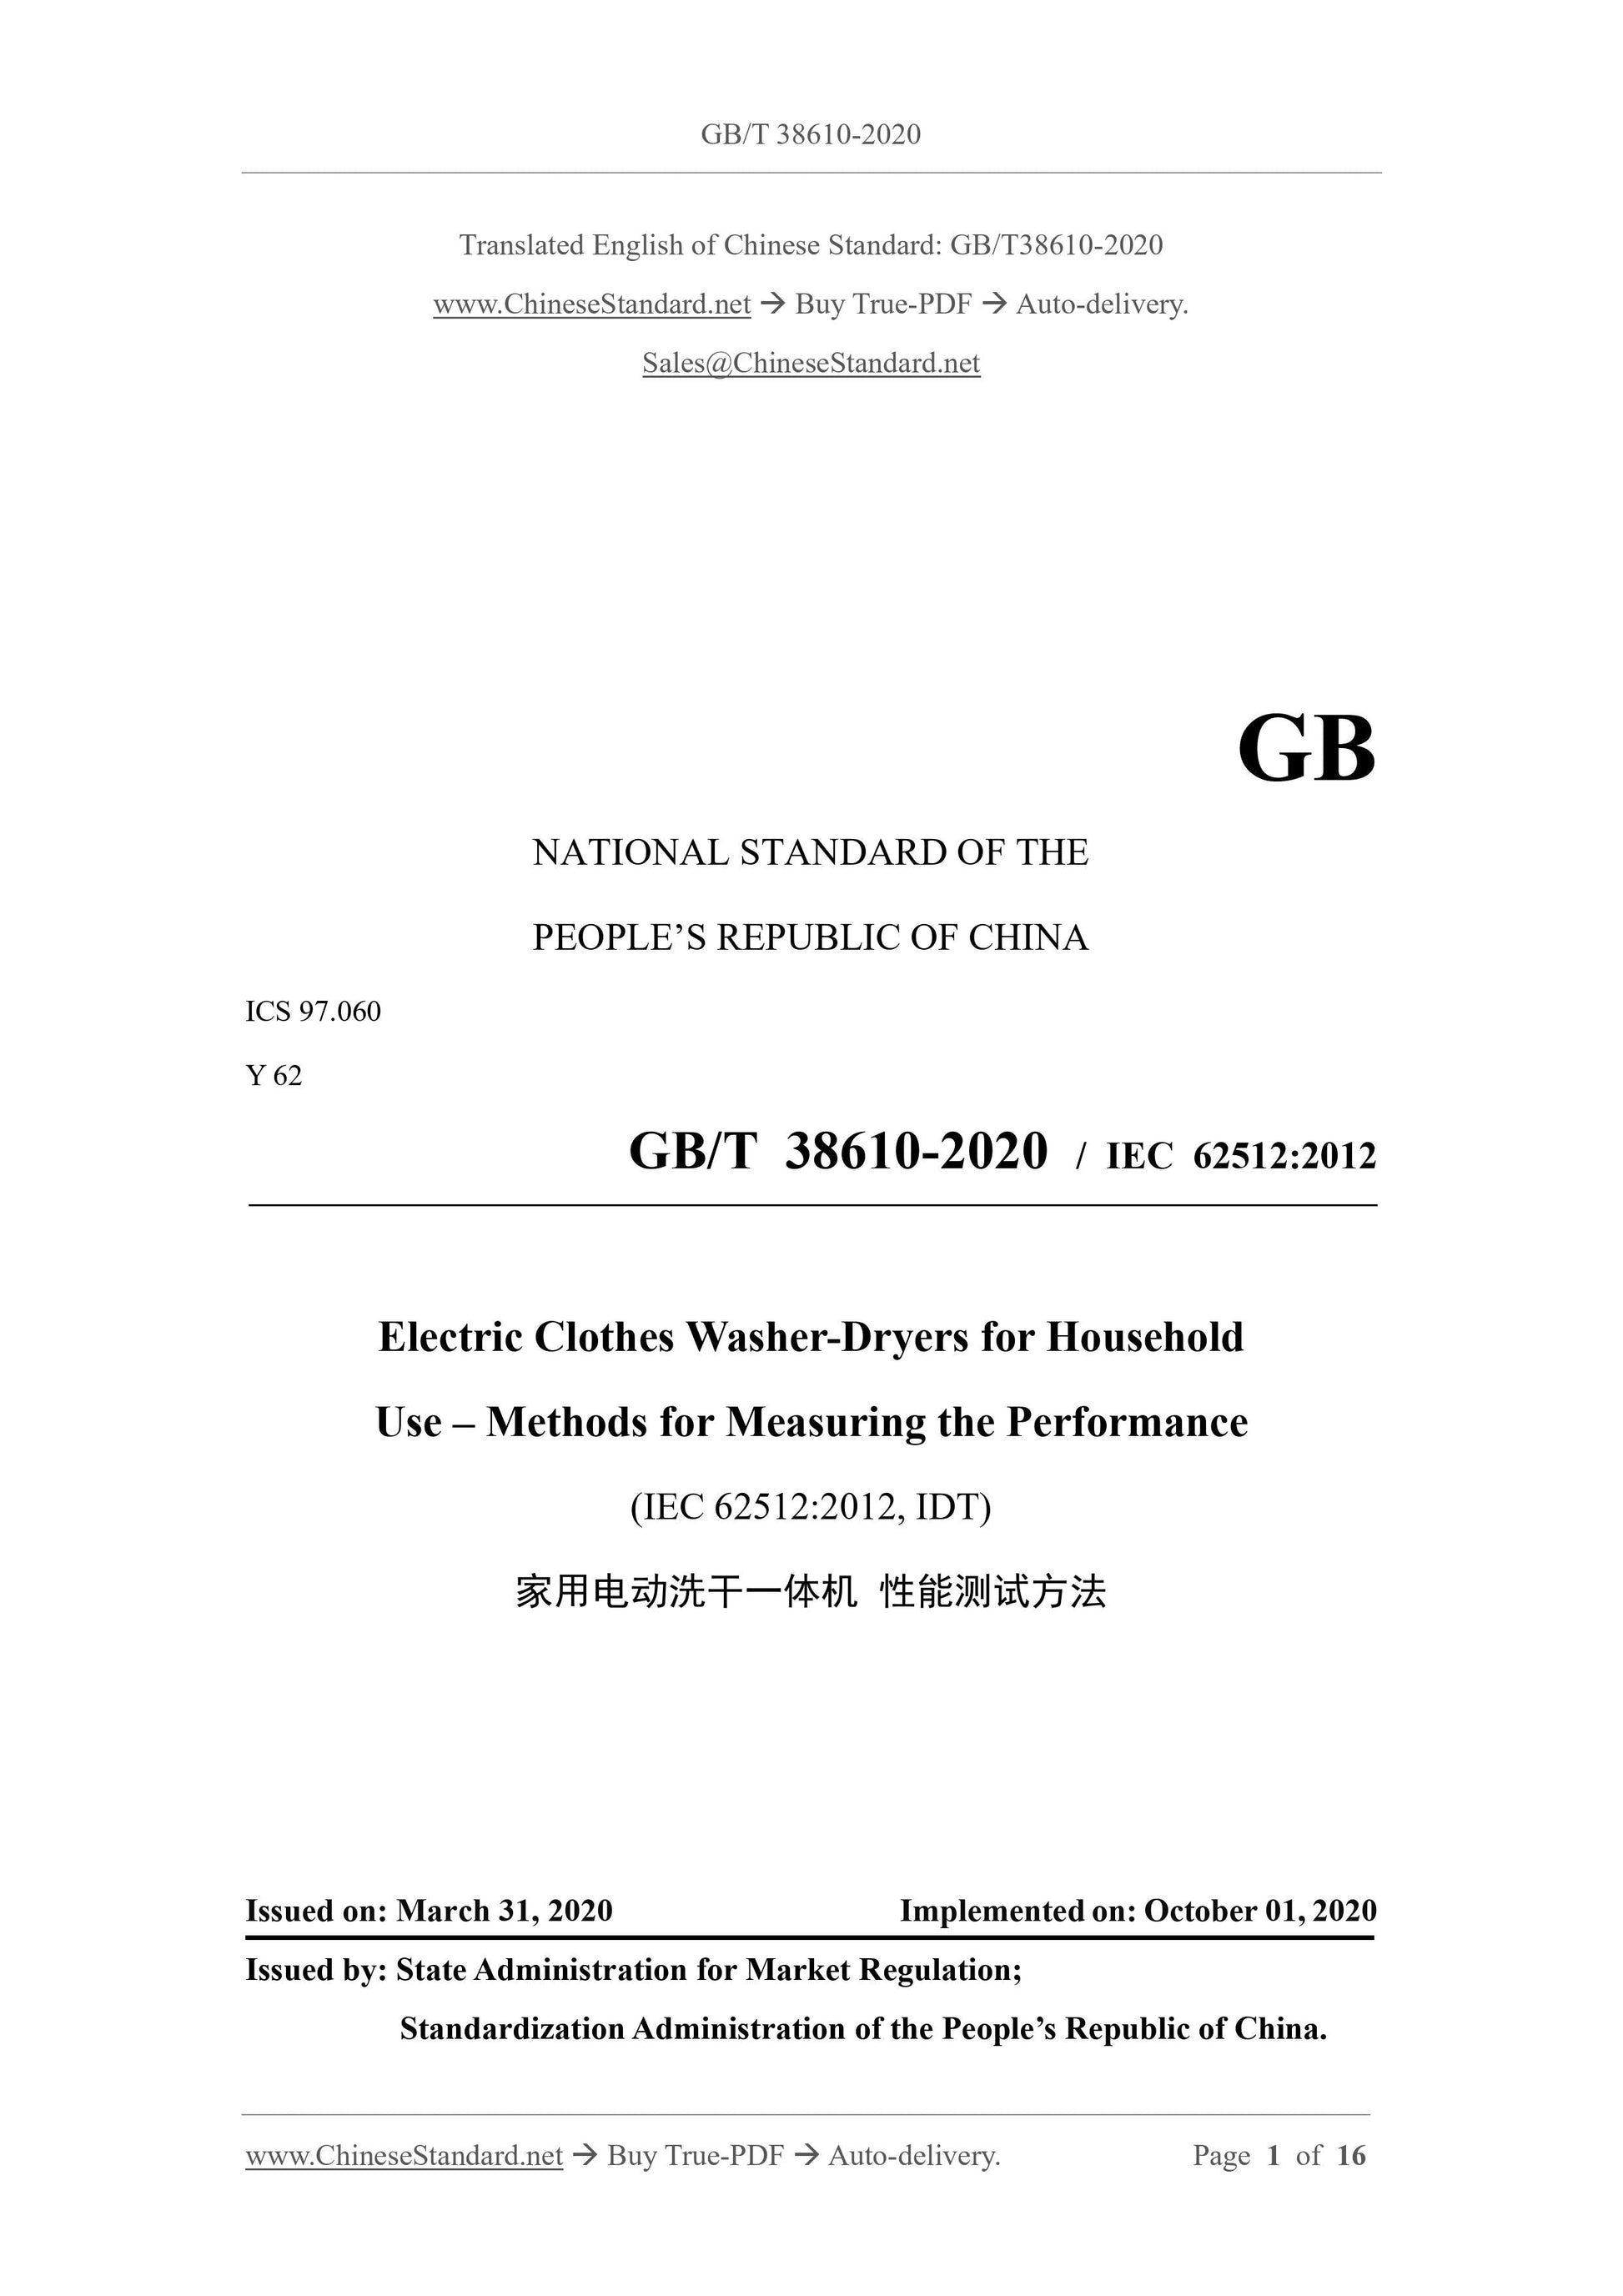 GB/T 38610-2020 Page 1